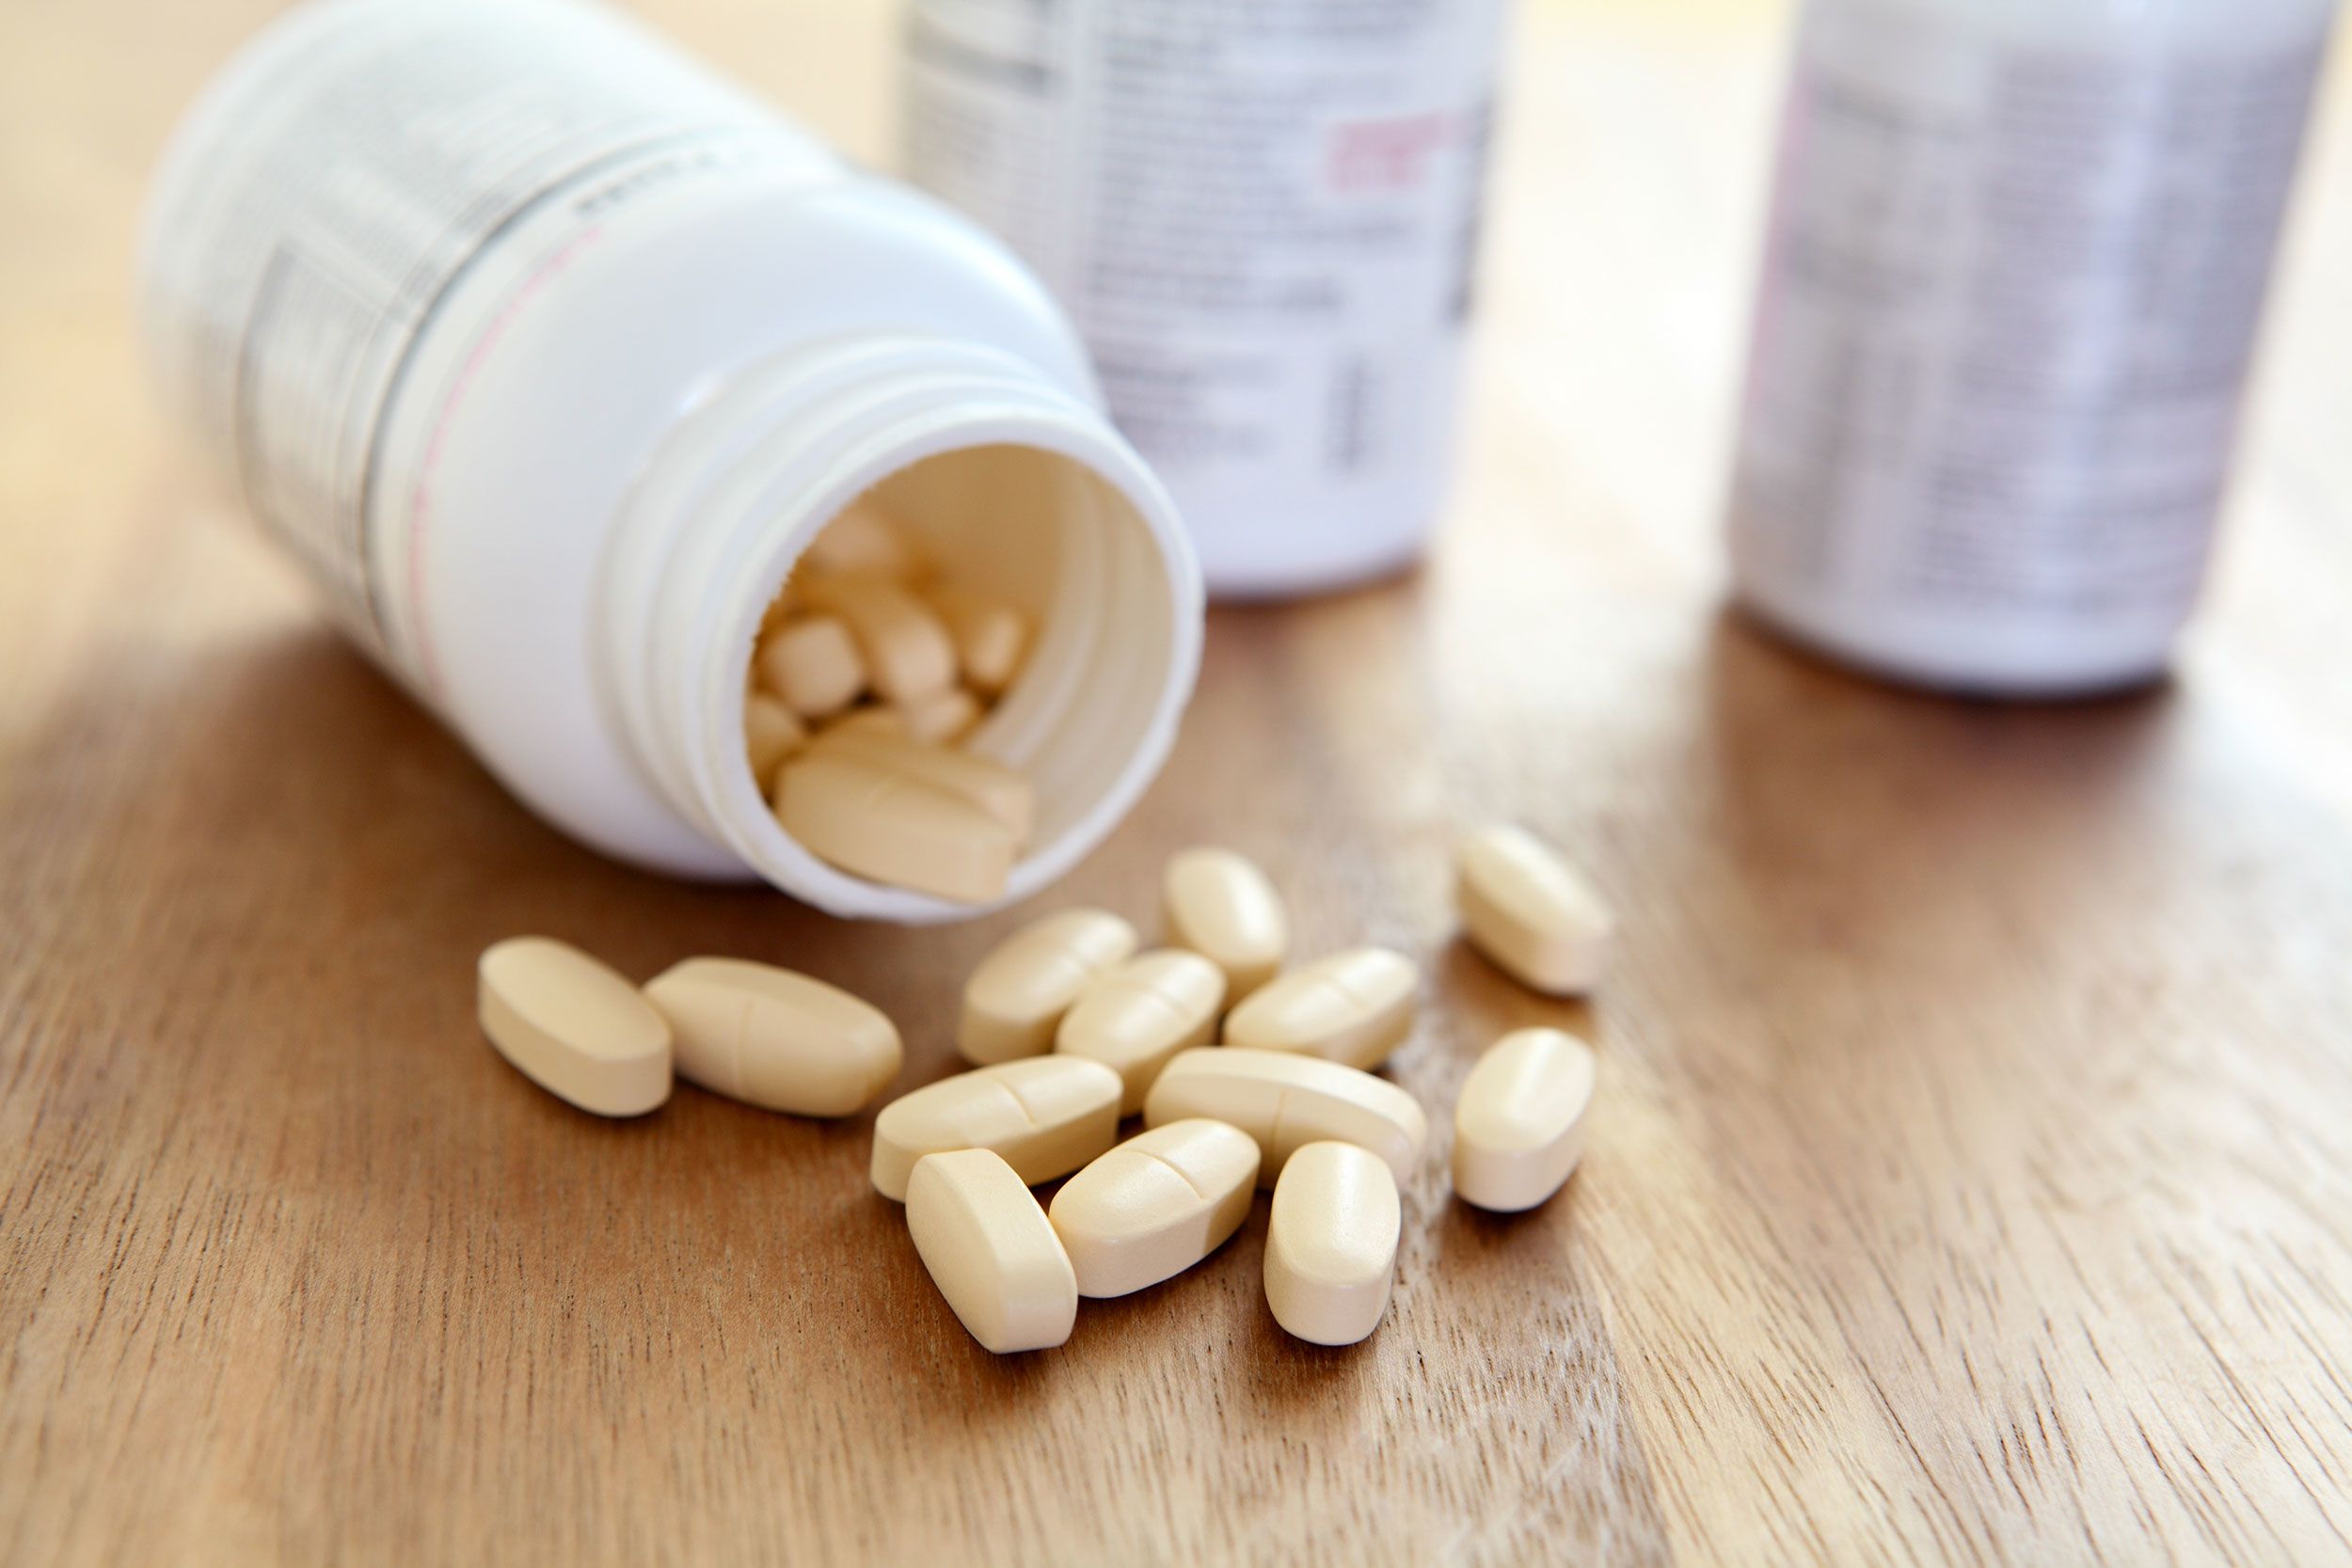 Why are supplements effective?